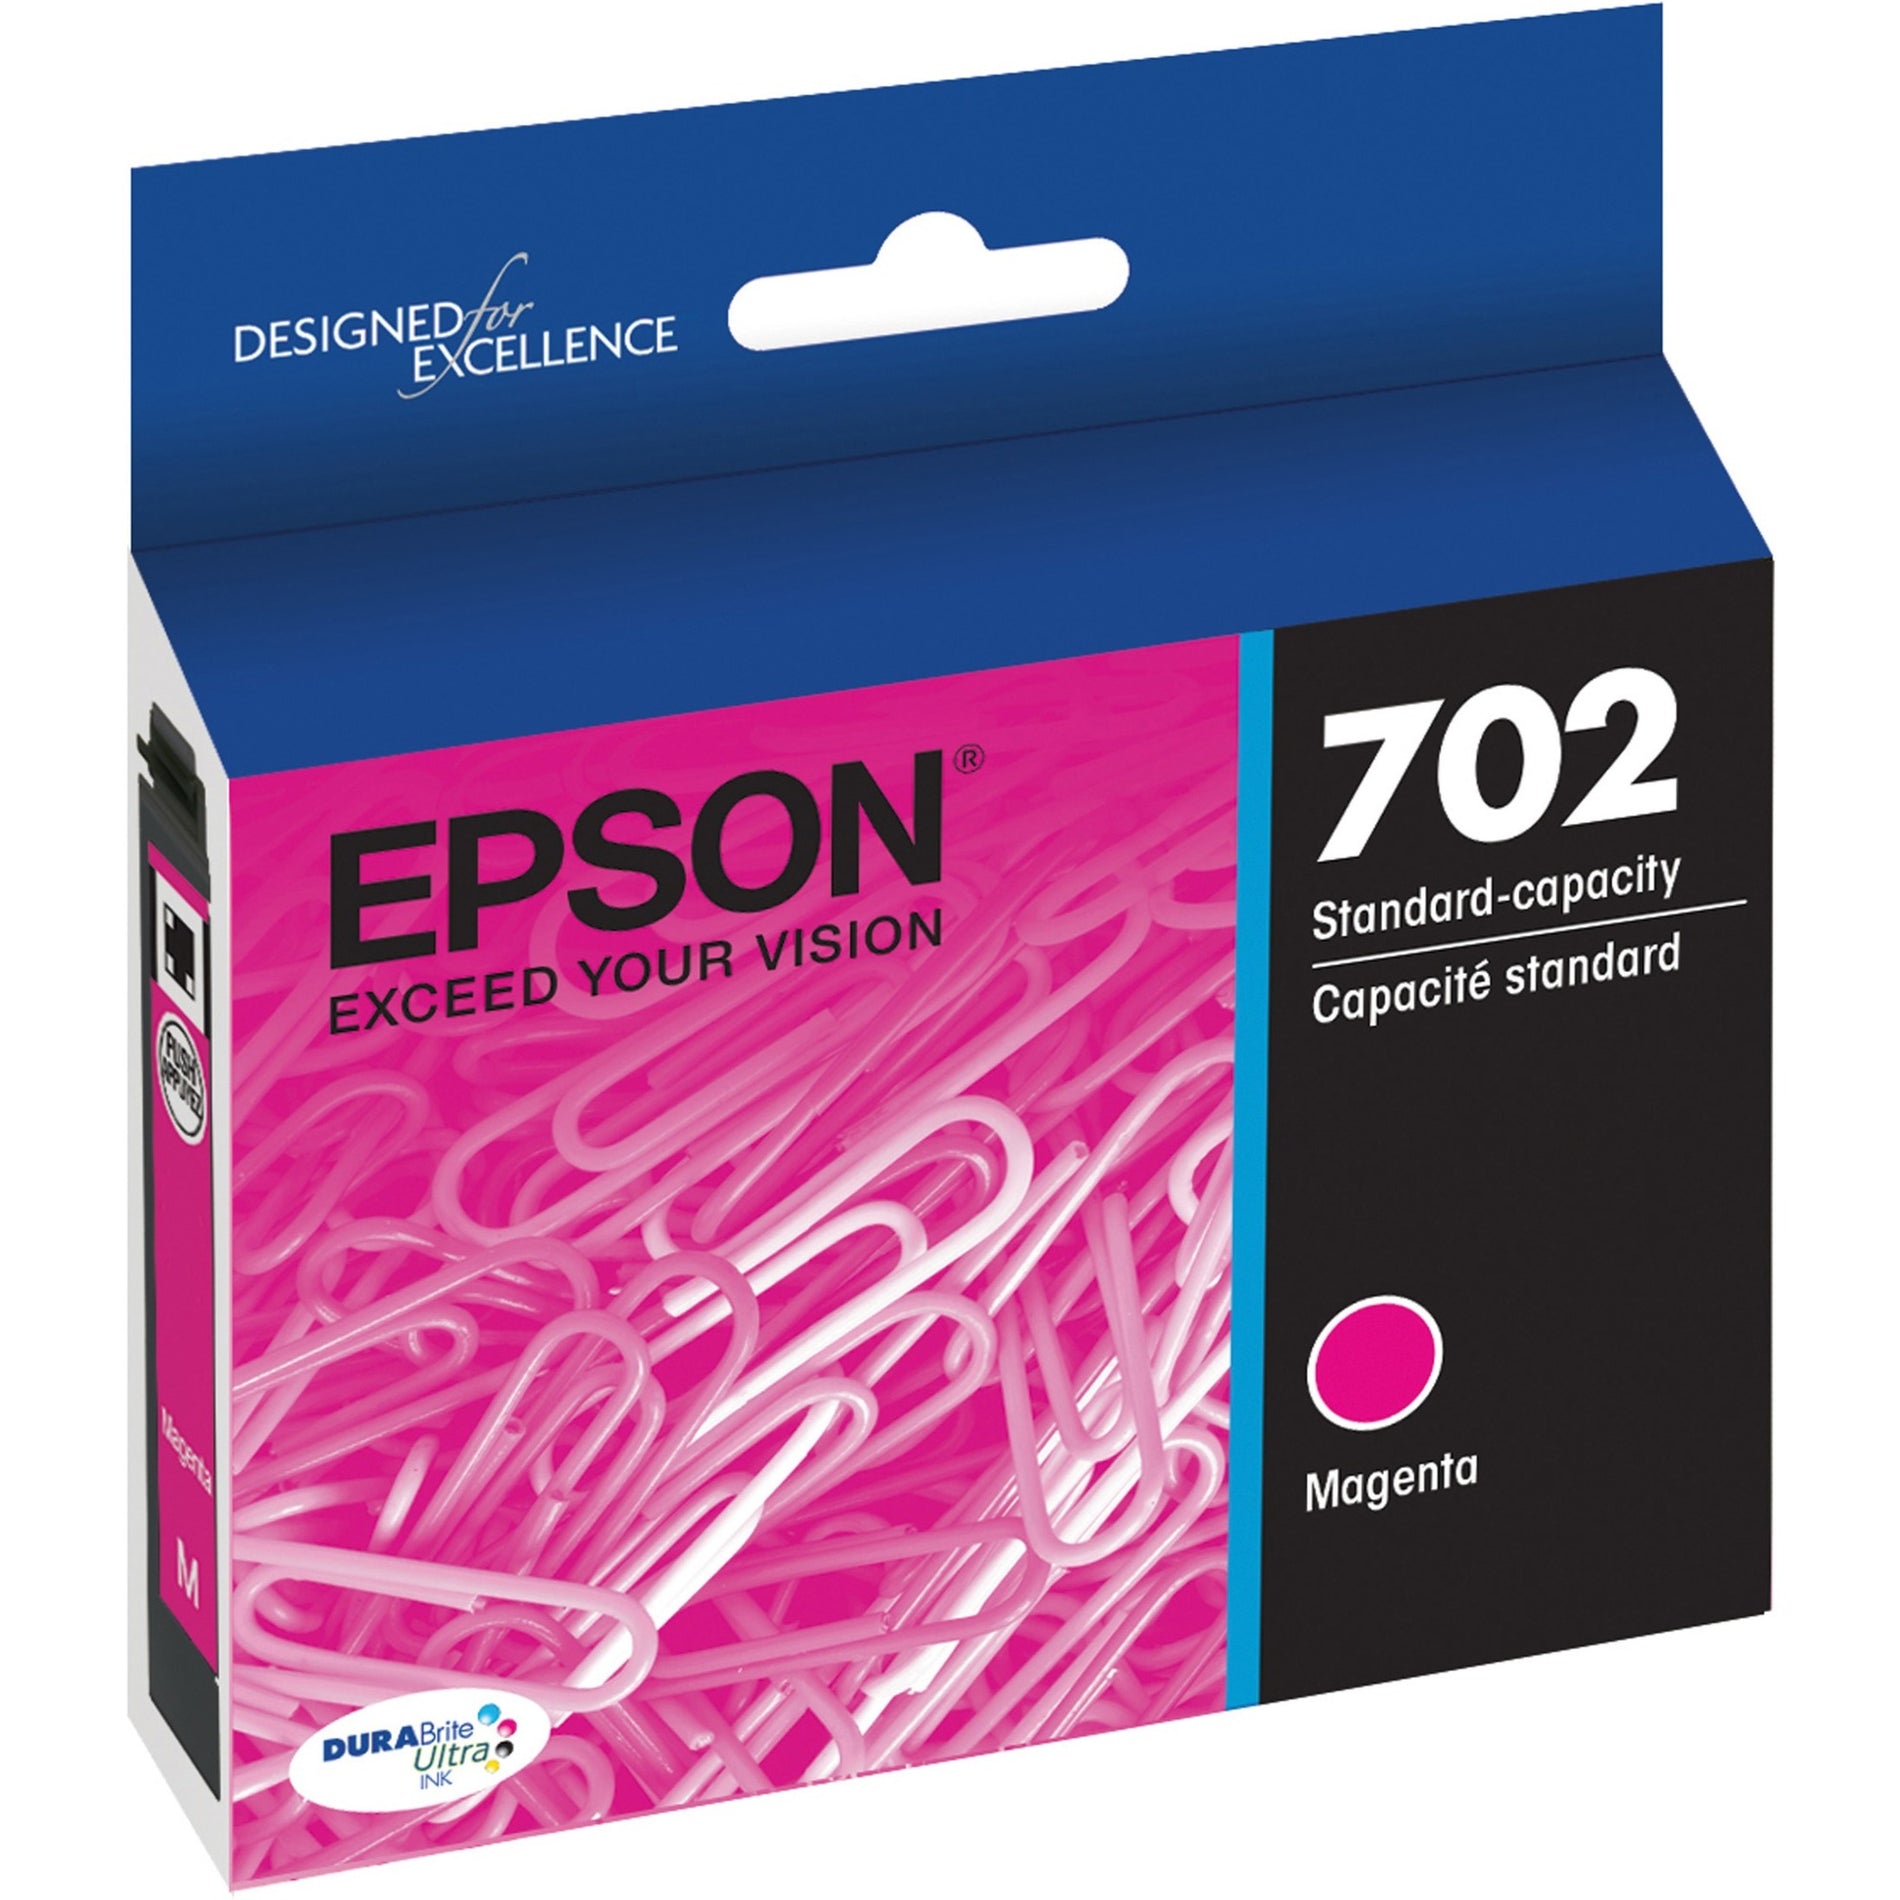 Epson T702320-S DURABrite Ultra Magenta Ink Cartridge, Standard Yield, 300 Pages